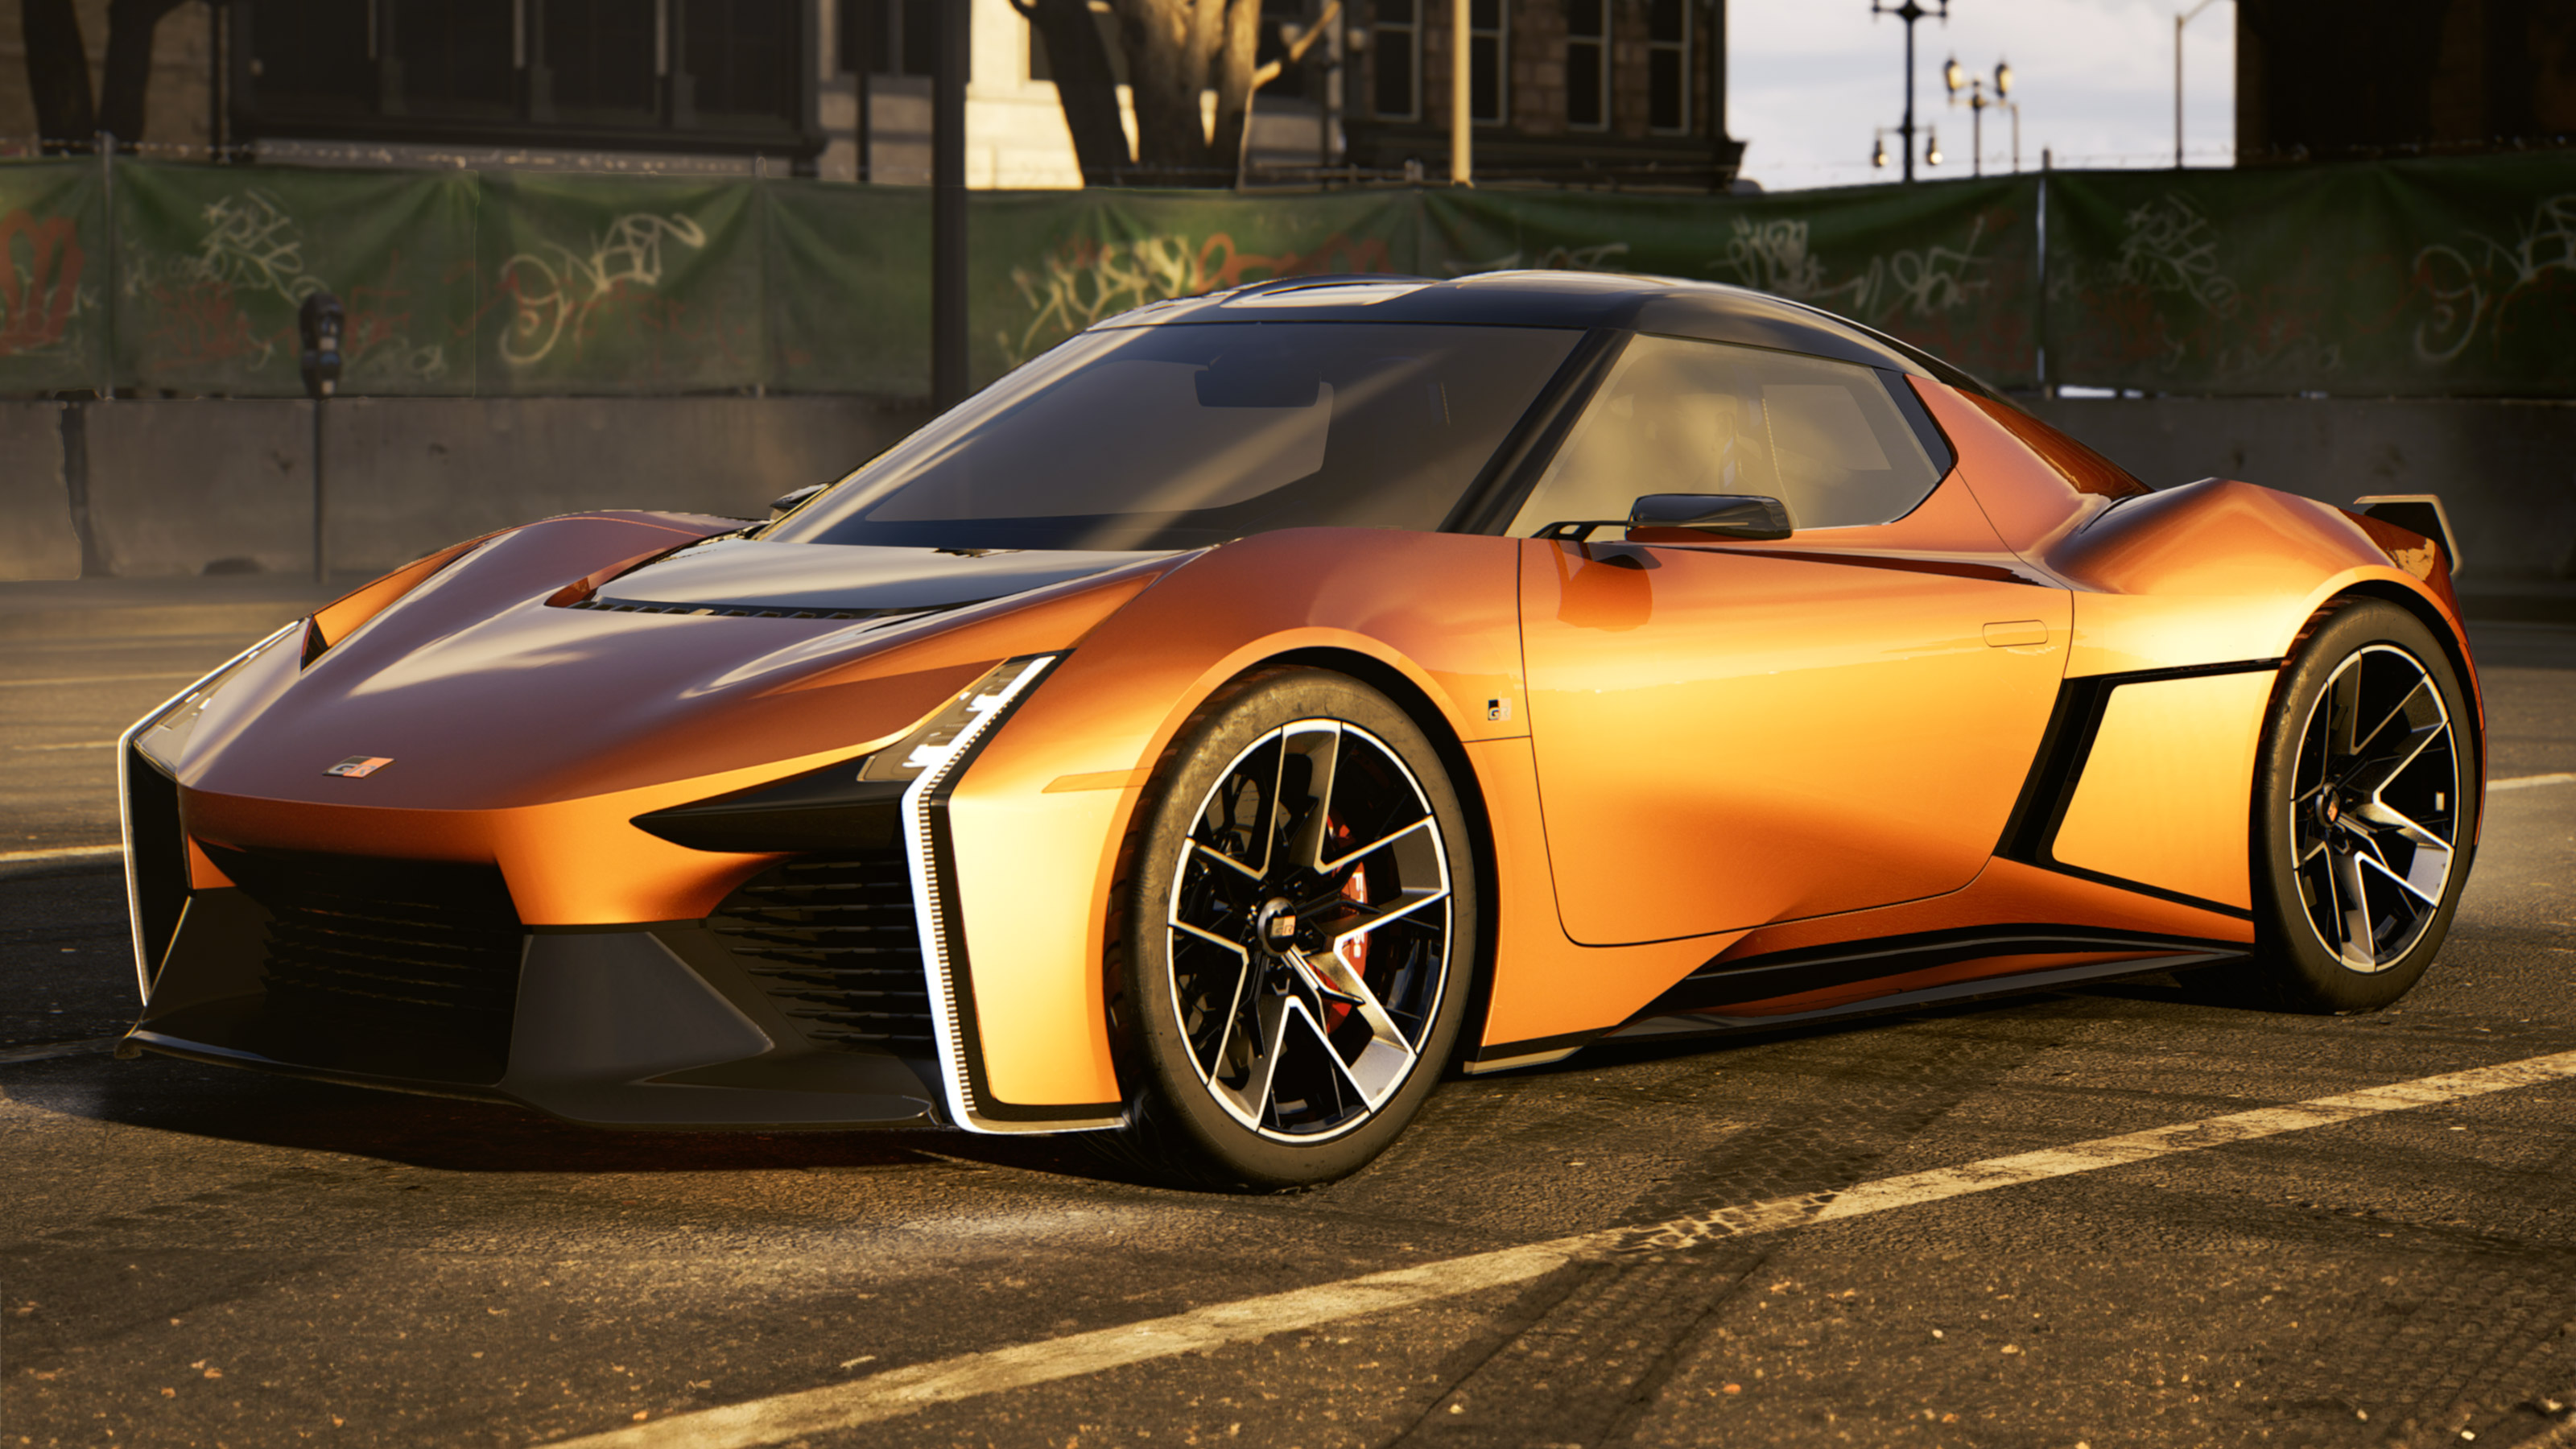 Toyota's FT-Se sports car could make production